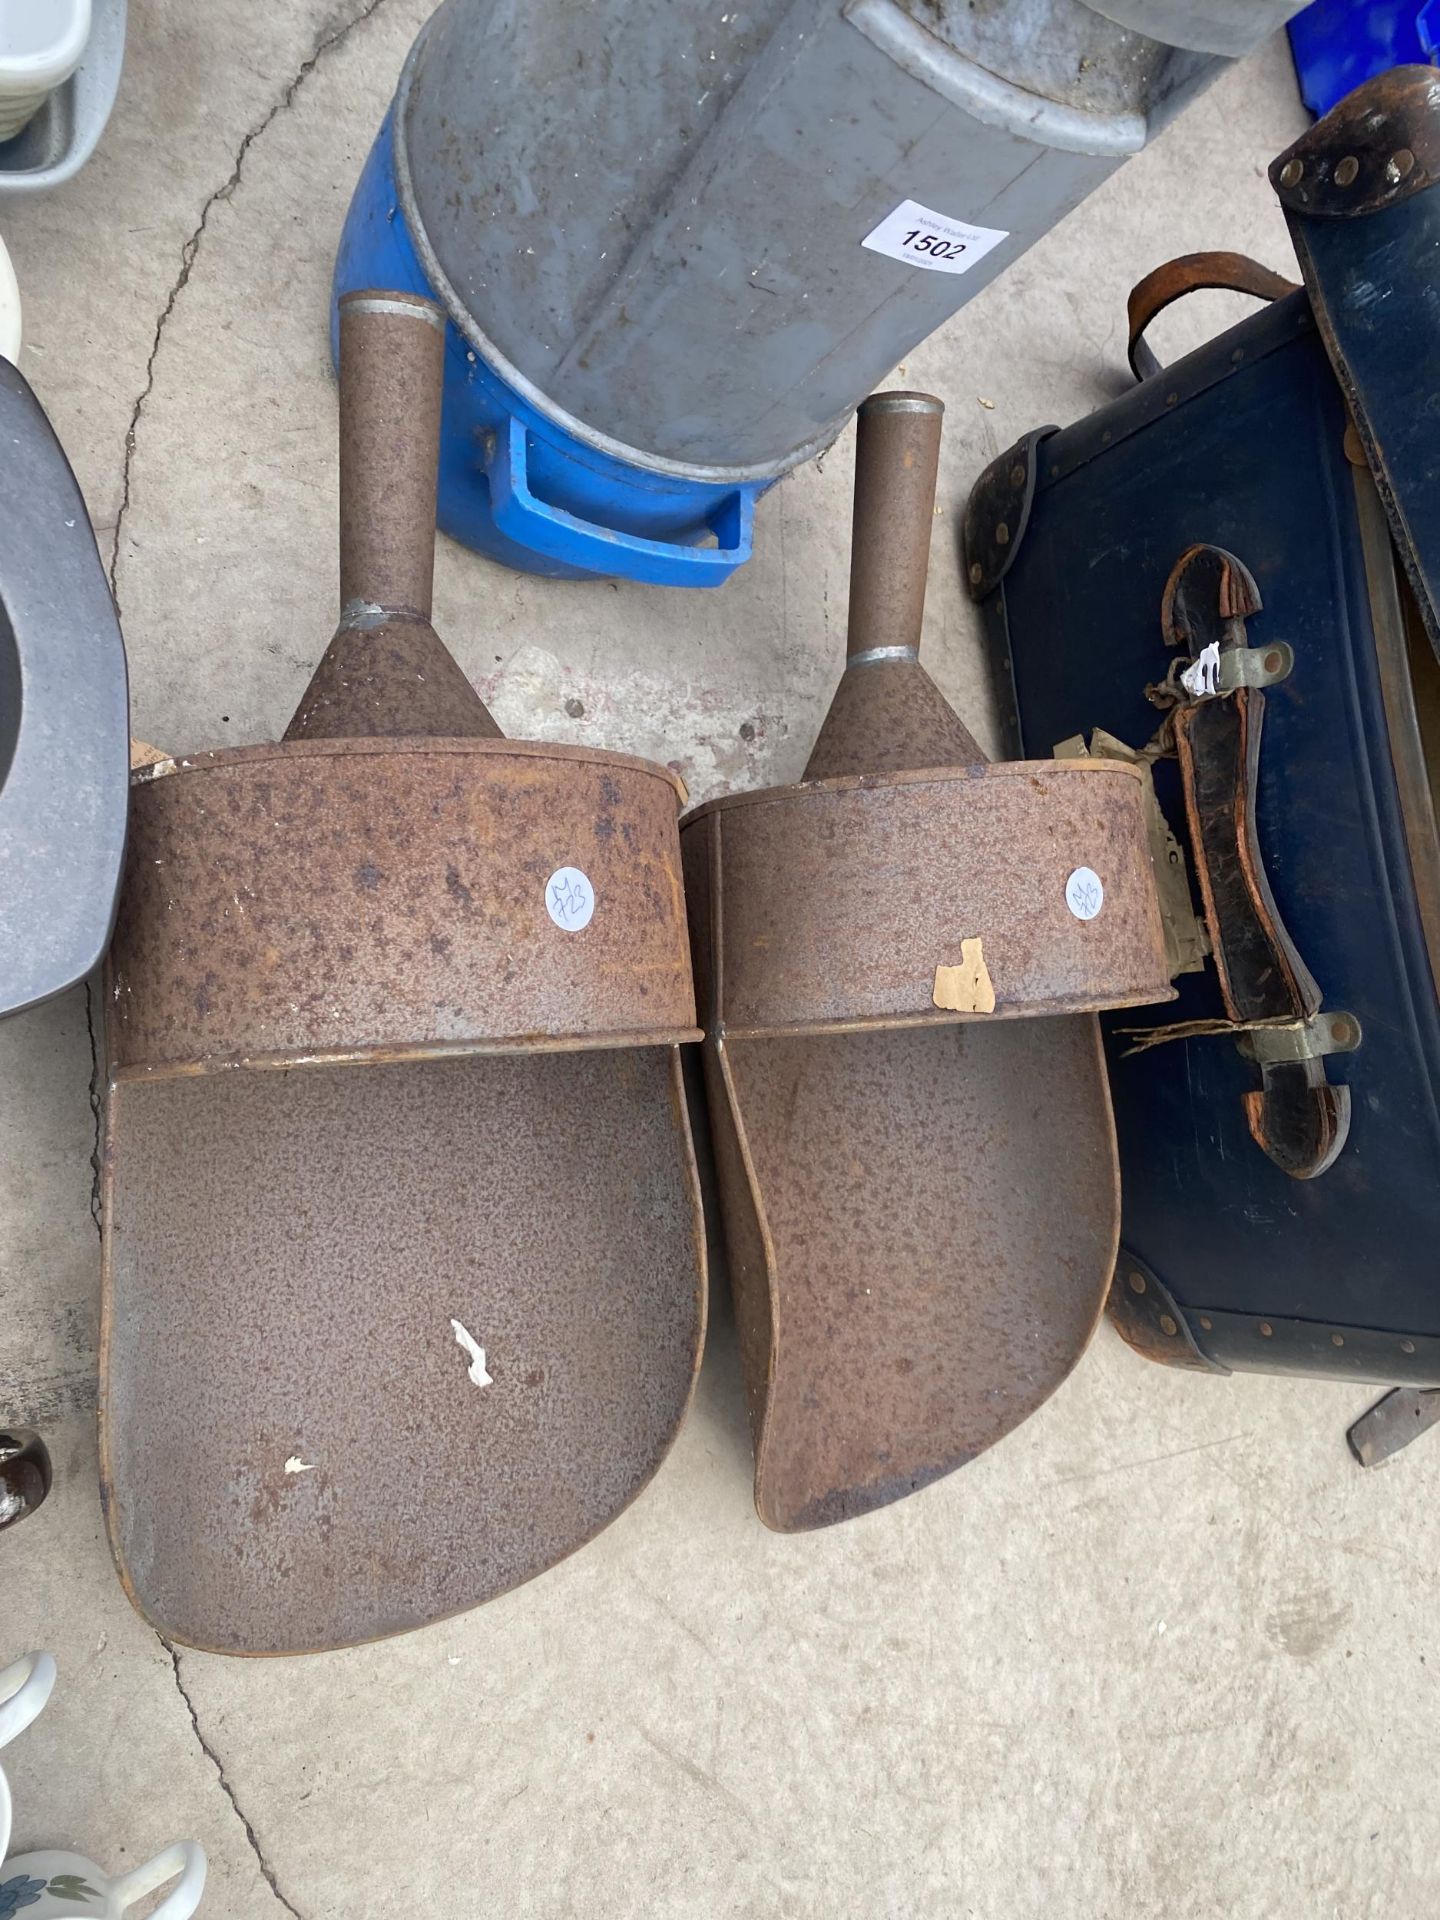 A PLASTIC COAL SKUTTLE AND TWO LARGE METAL SCOOPS - Image 2 of 2